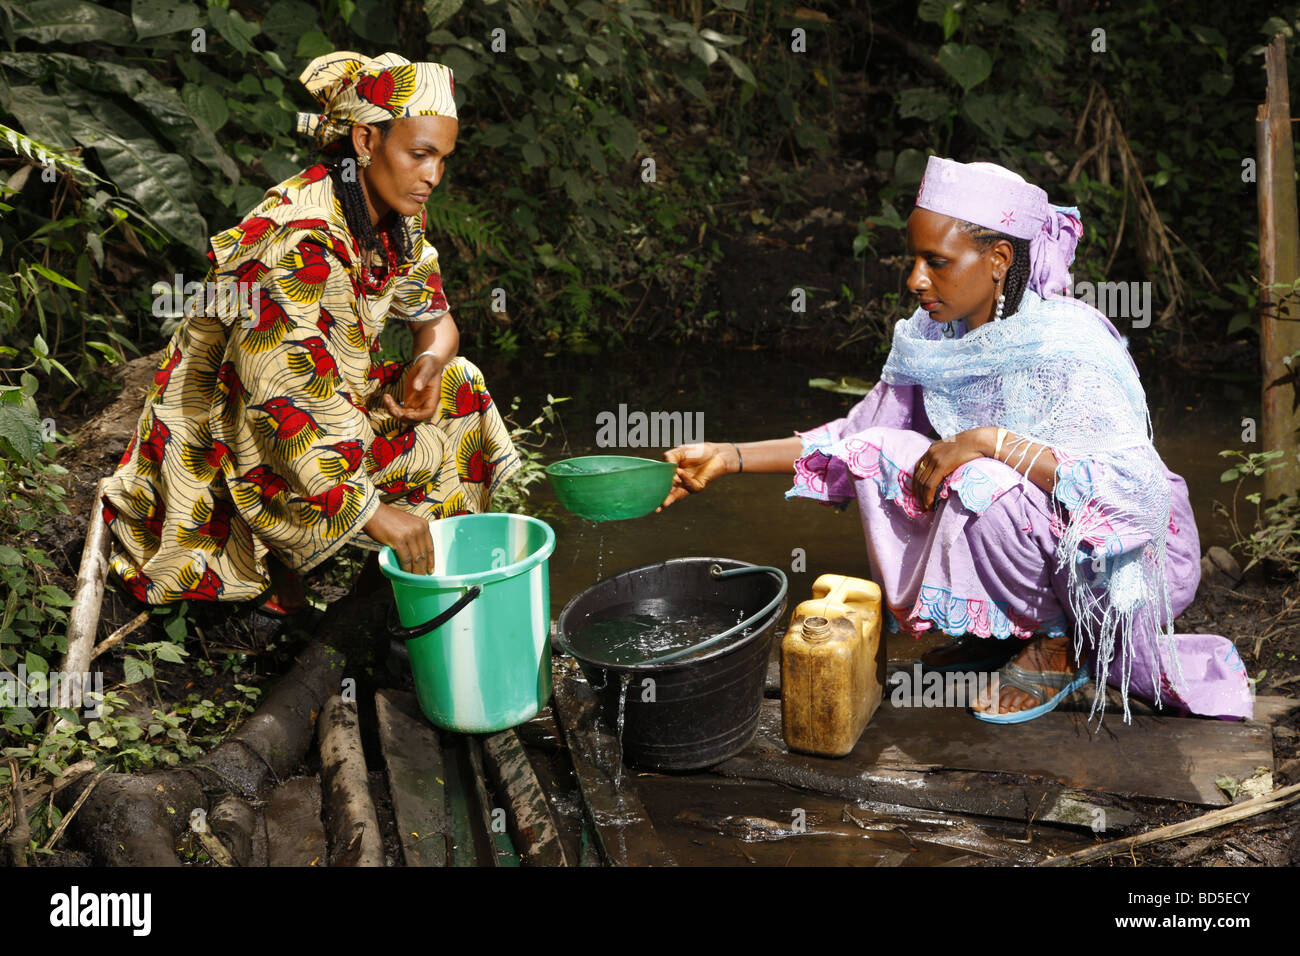 Women fetching water at the river, Mbororo ethnic group, Bamenda, Cameroon, Africa Stock Photo